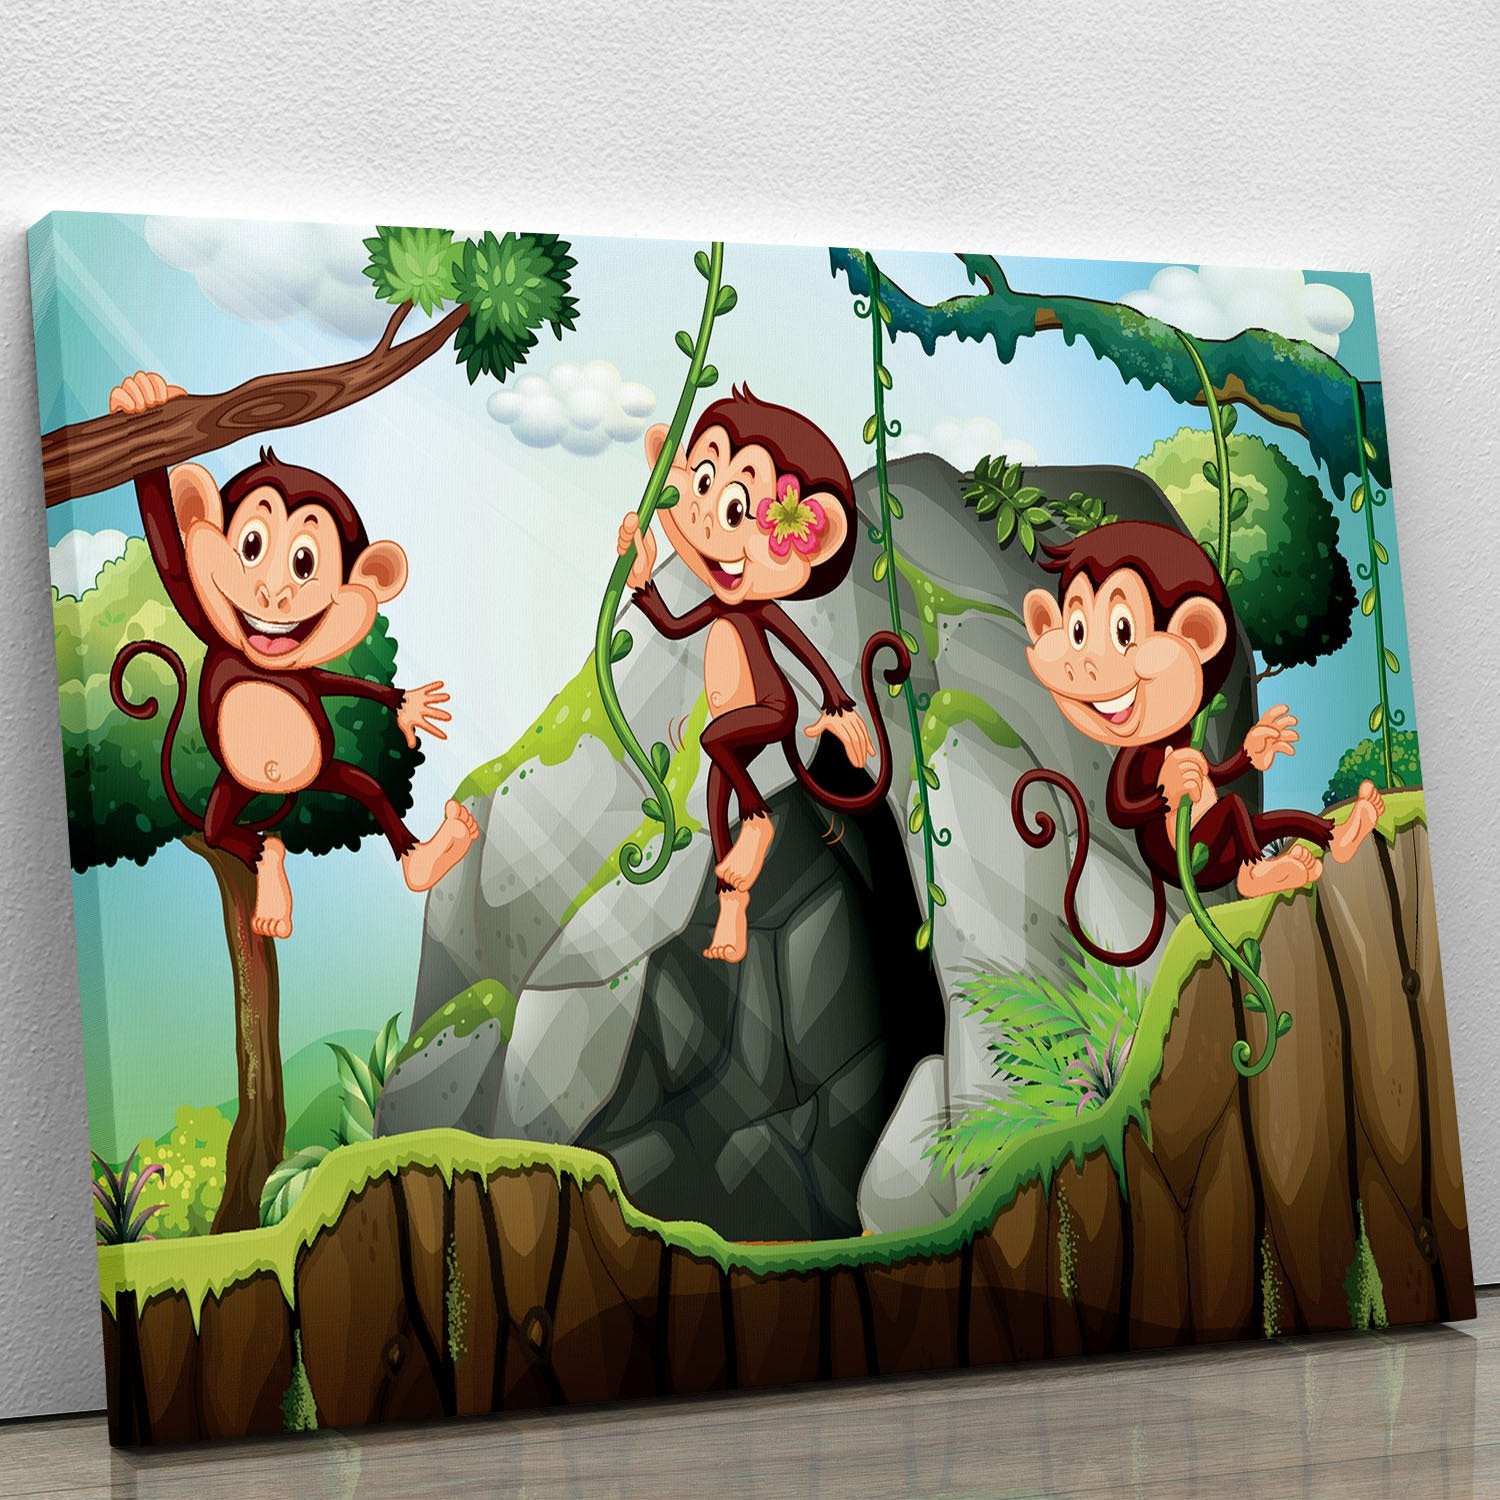 Three monkeys hanging on the branch Canvas Print or Poster